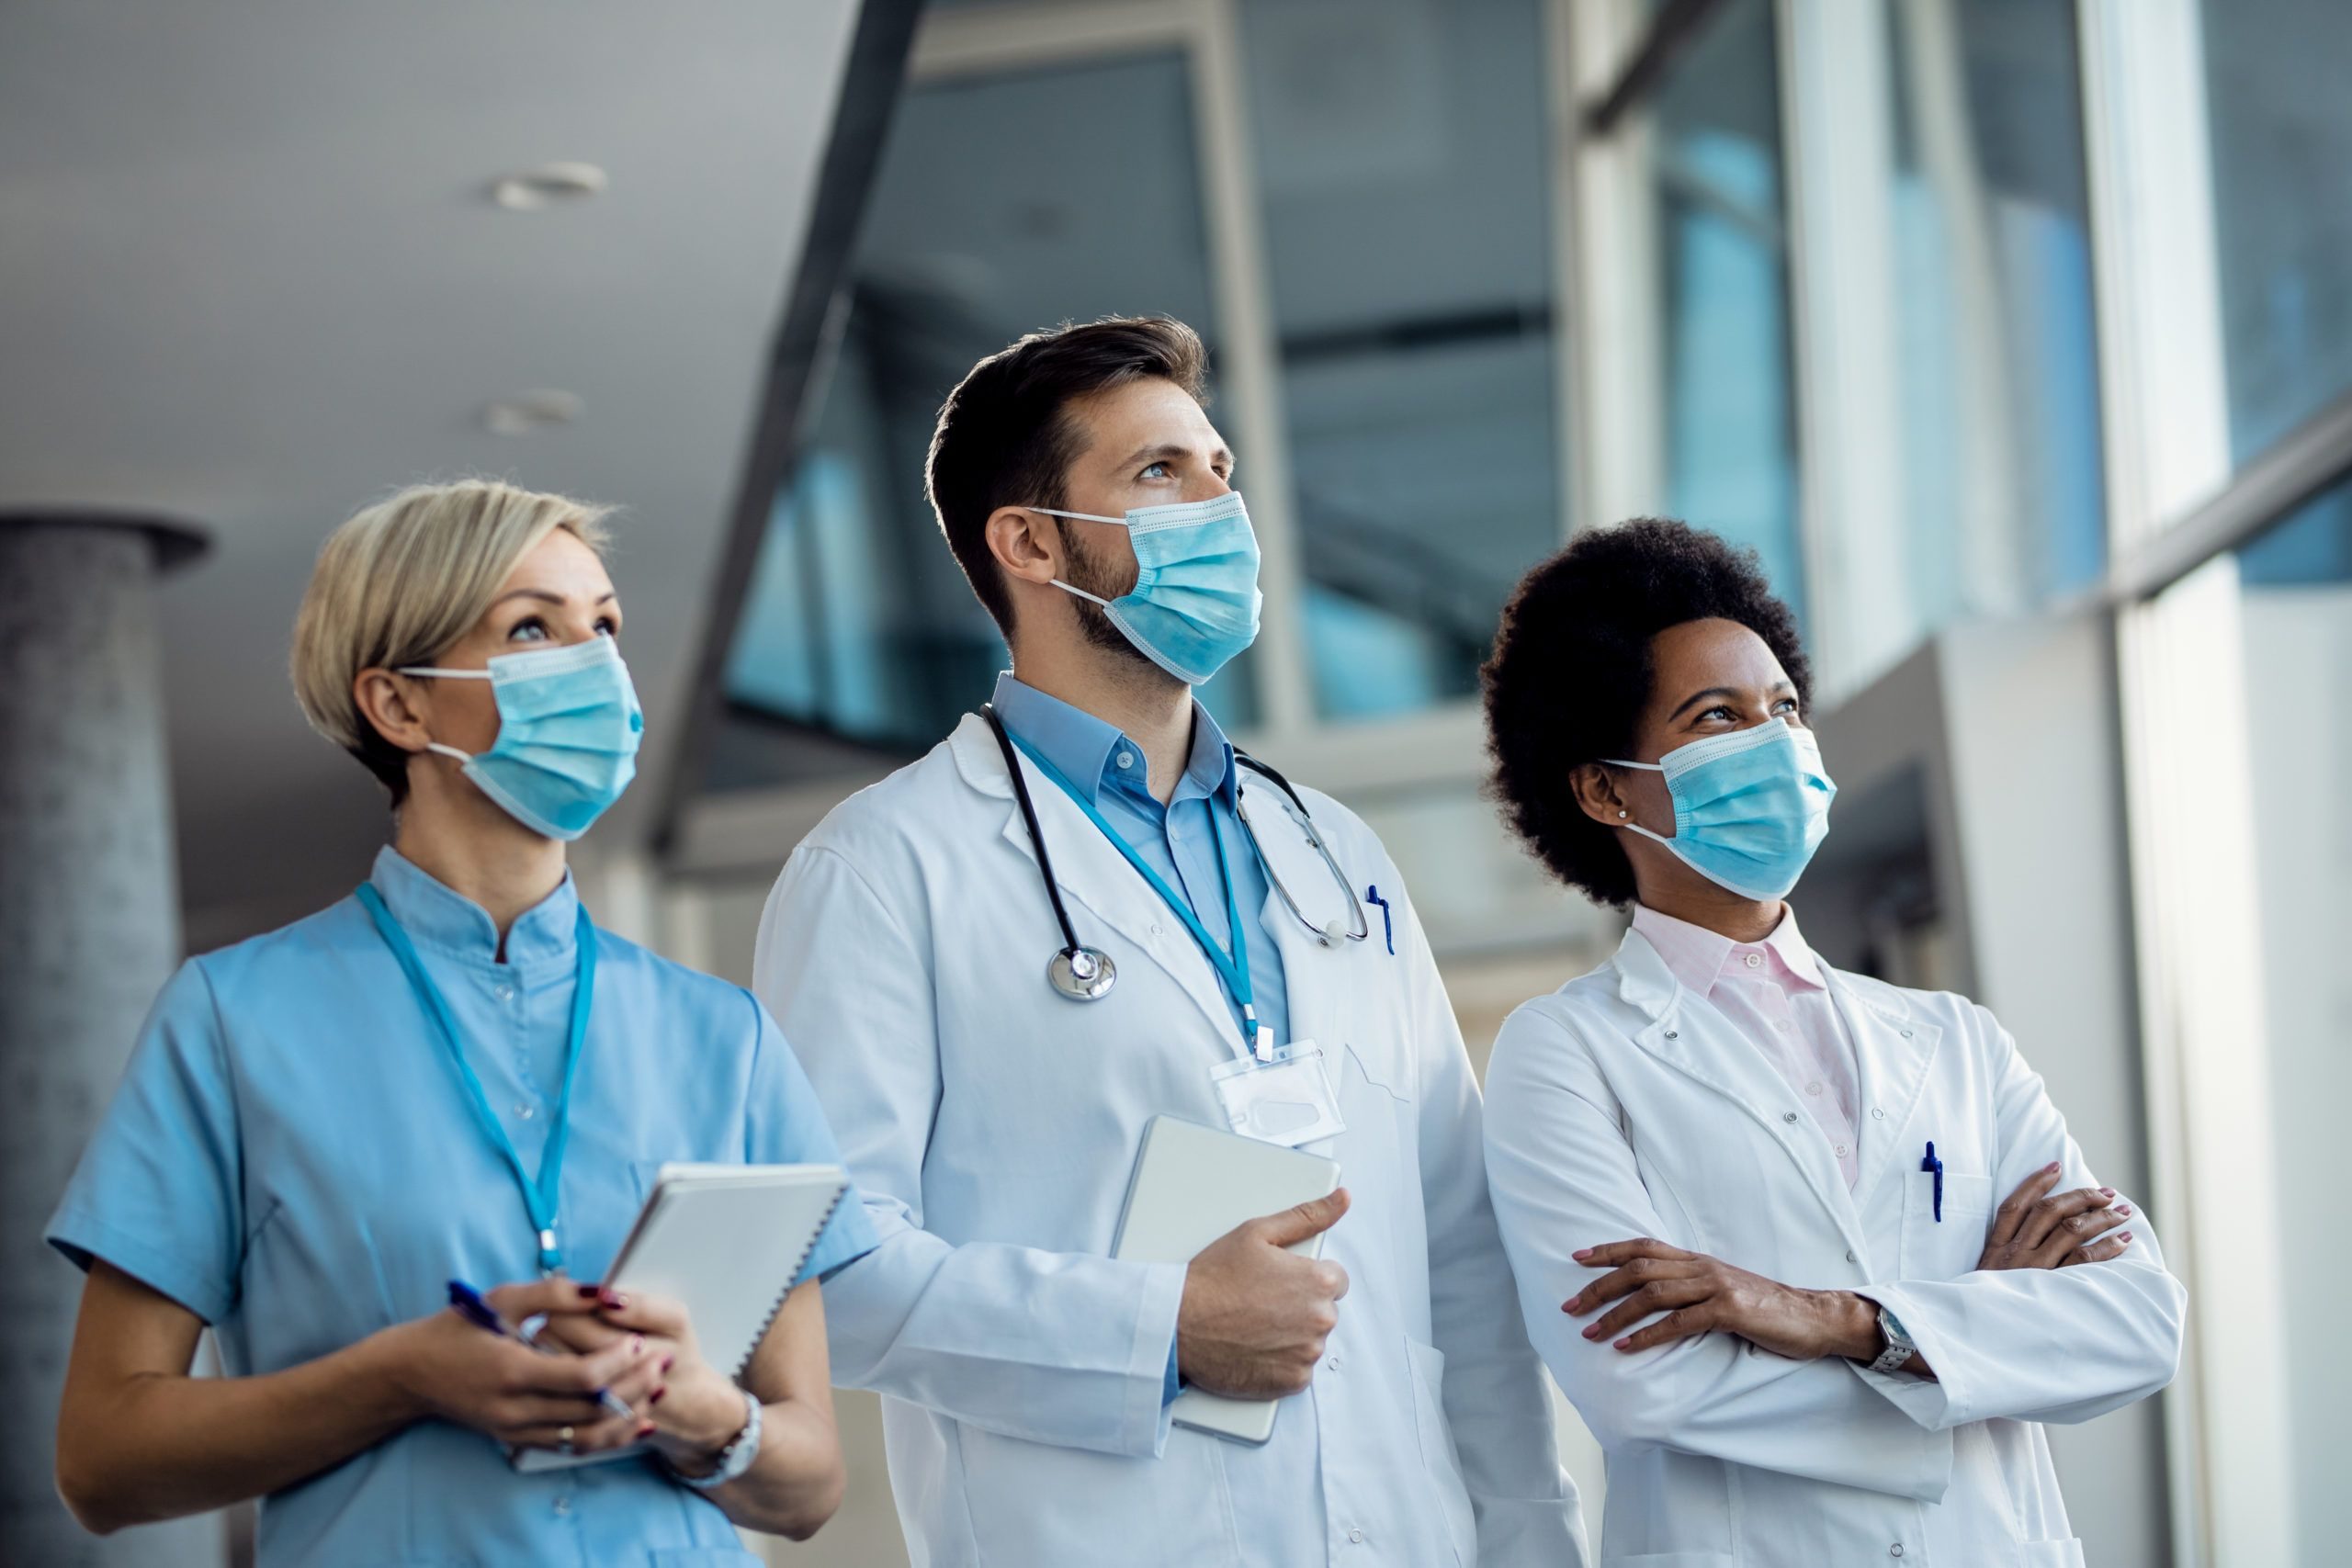 Team of medical experts with face masks at the hospital during c